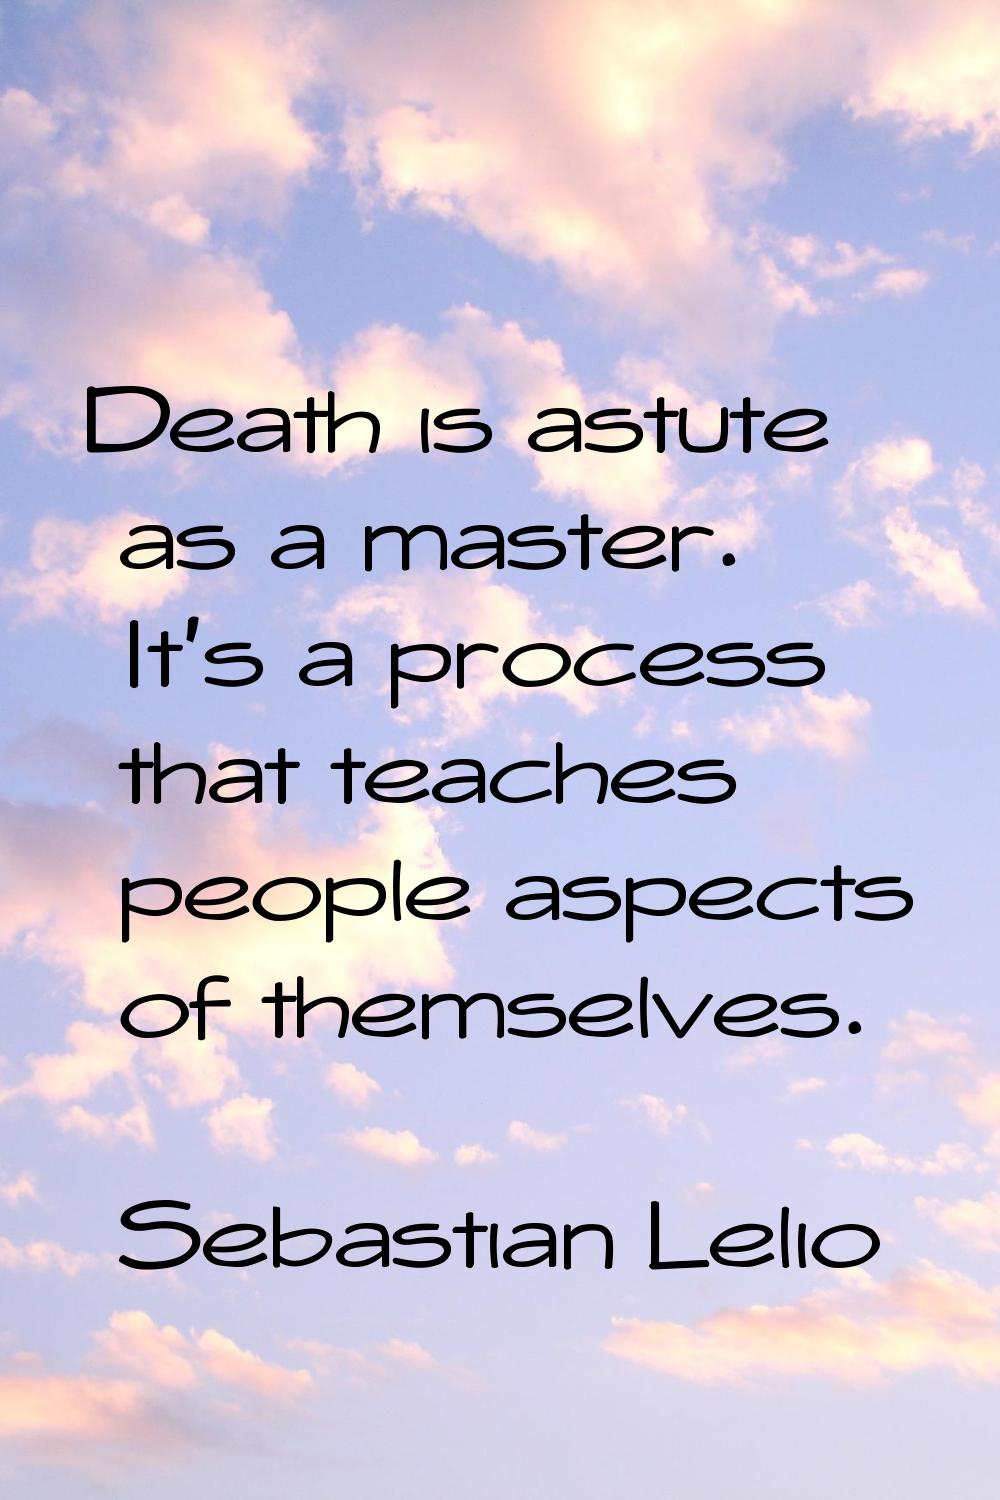 Death is astute as a master. It's a process that teaches people aspects of themselves.